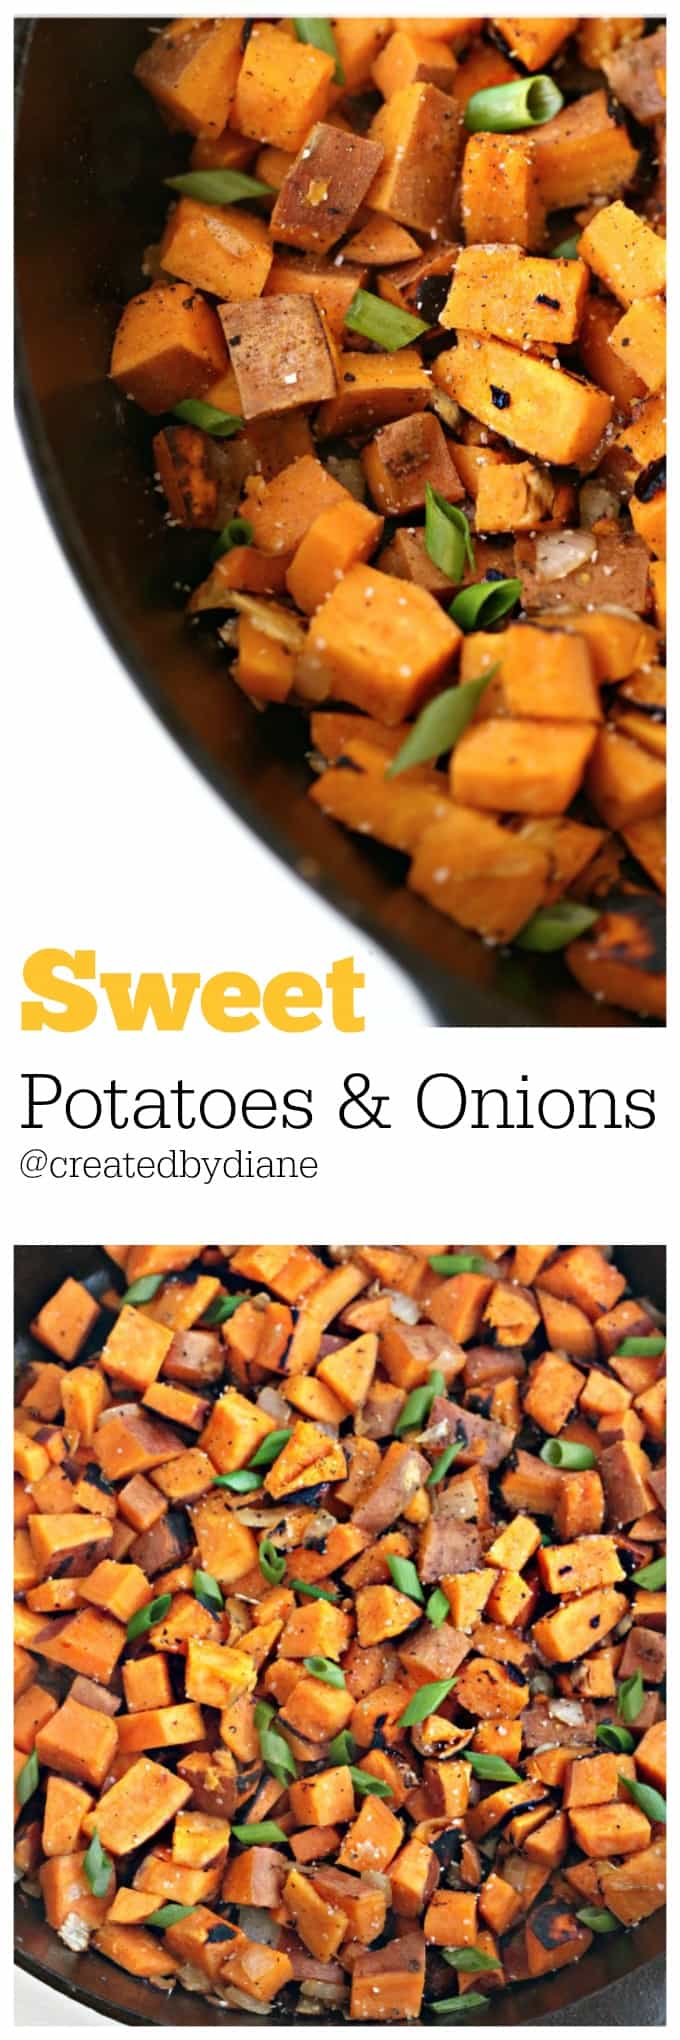 Sweet Potatoes and Onions in a skillet @createdbydiane